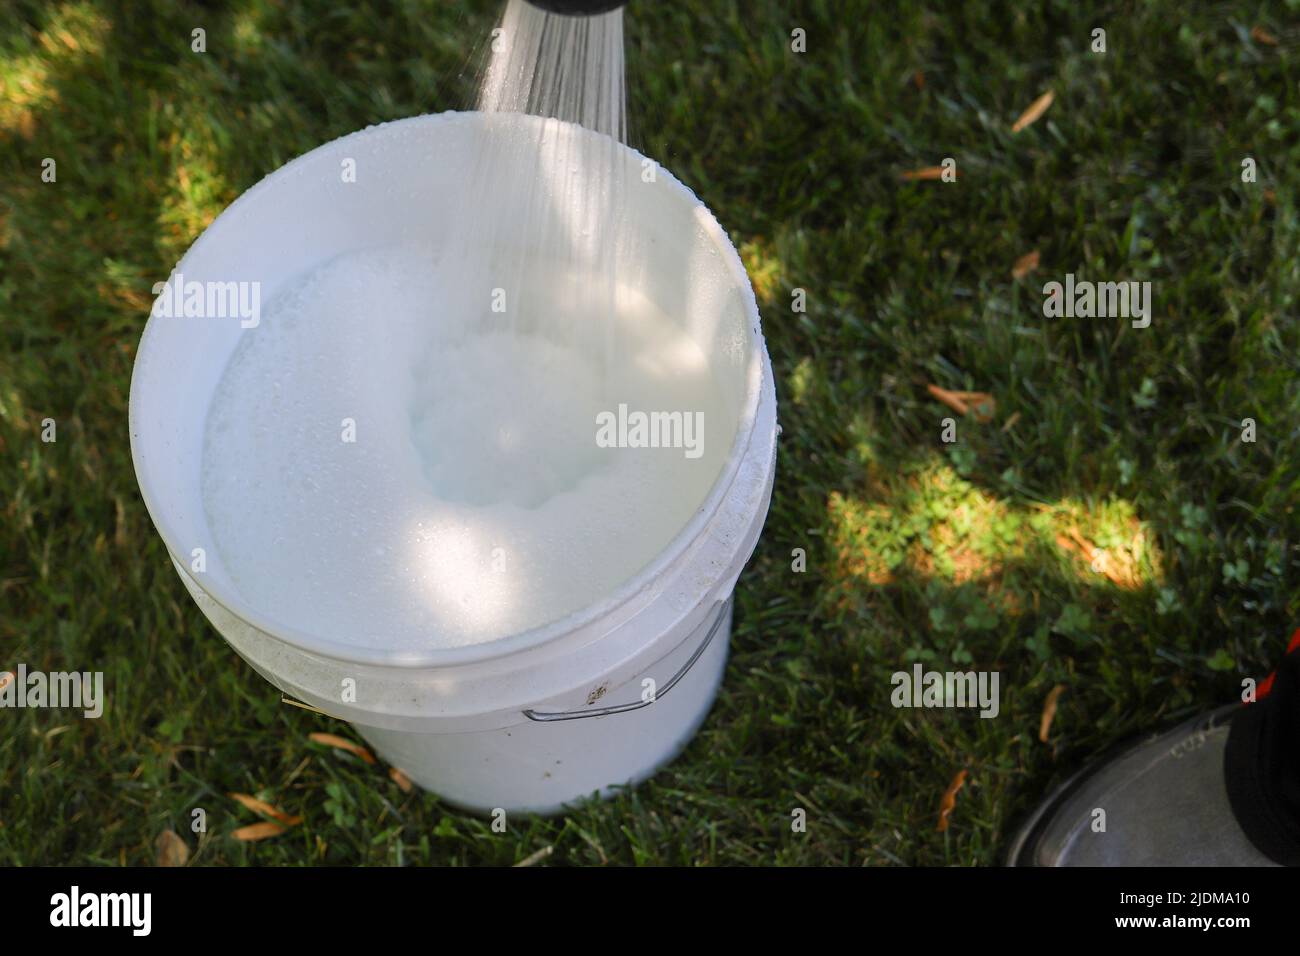 Close up of a person spraying water into a bucket of soapy water Stock Photo